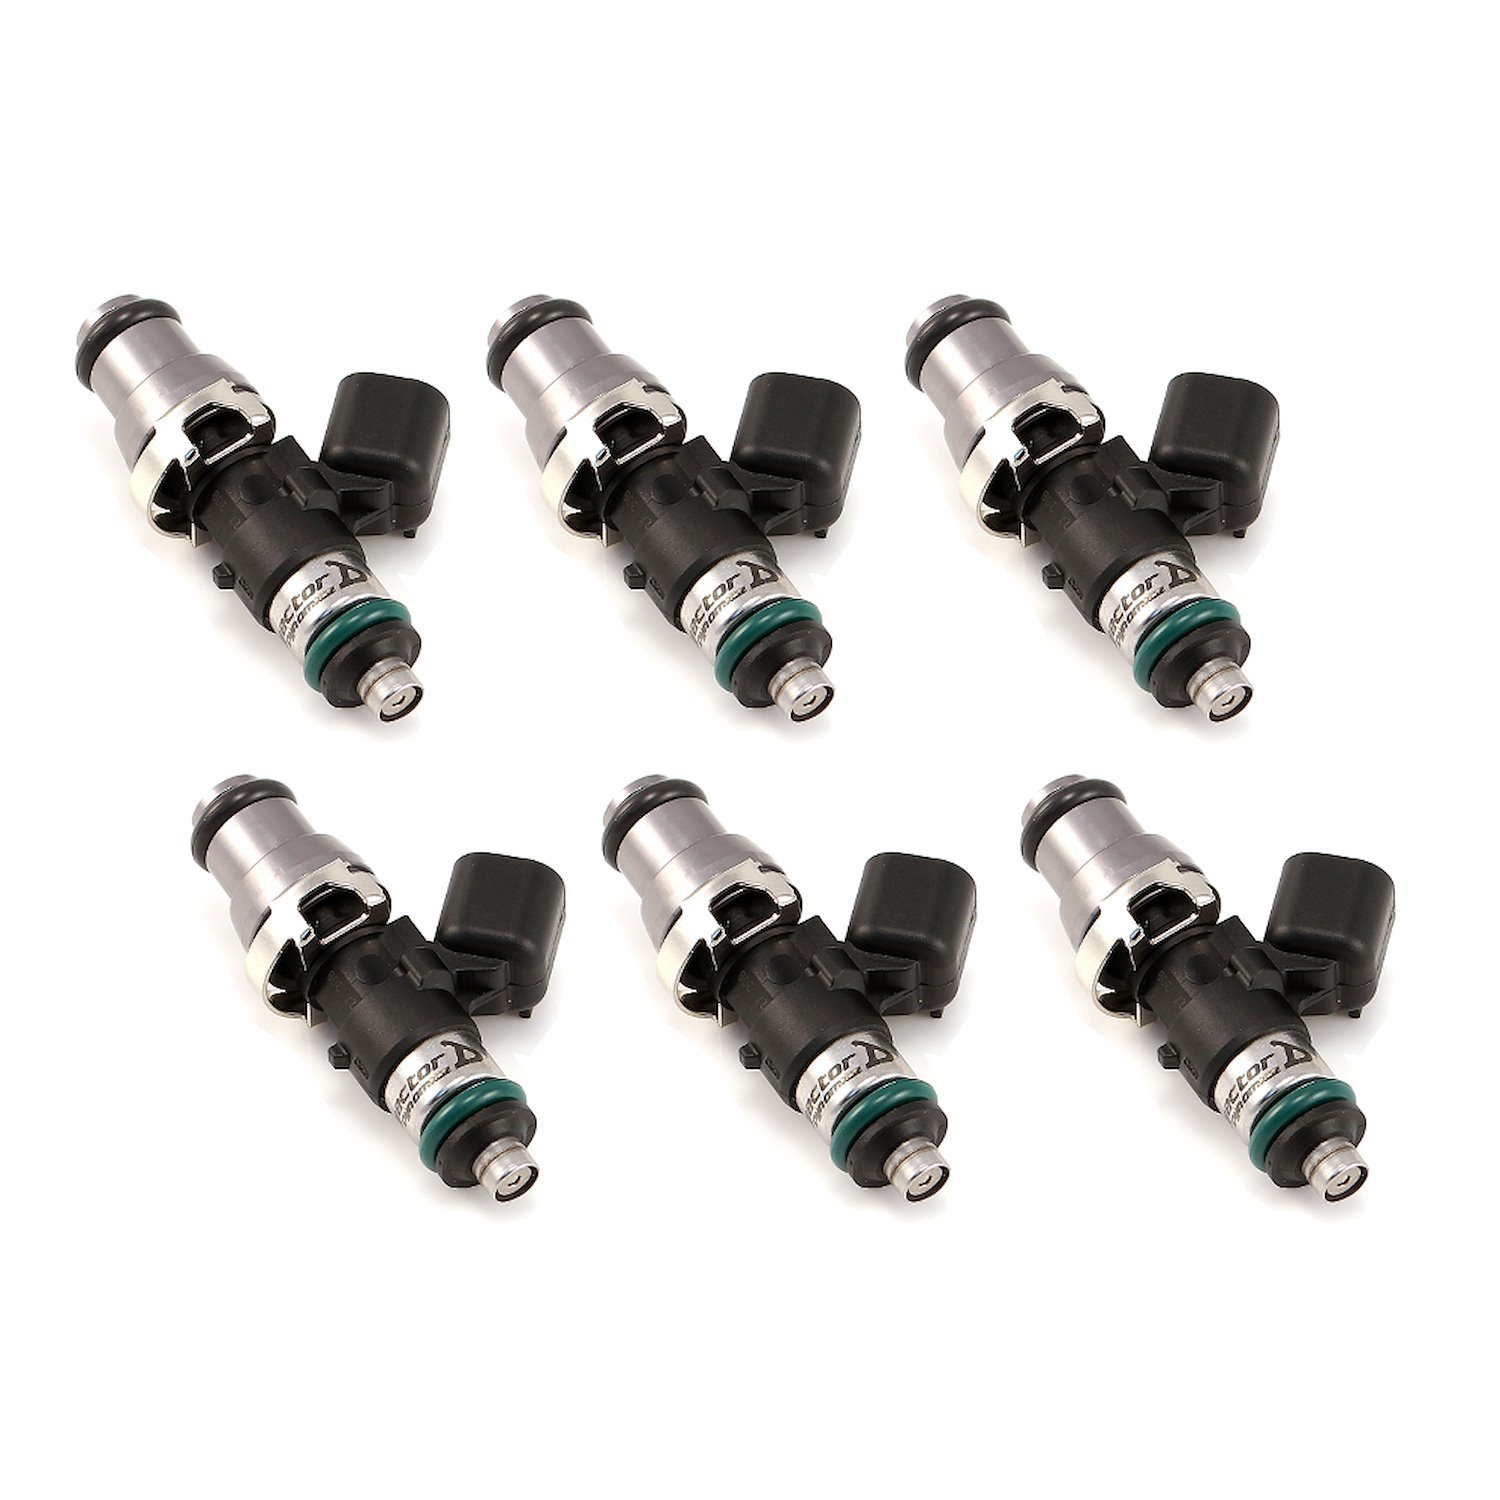 1300.48.14.14.6 1340cc Fuel Injector Set, 48 mm Length, 14 mm Grey Top, 14 mm Lower O-Ring